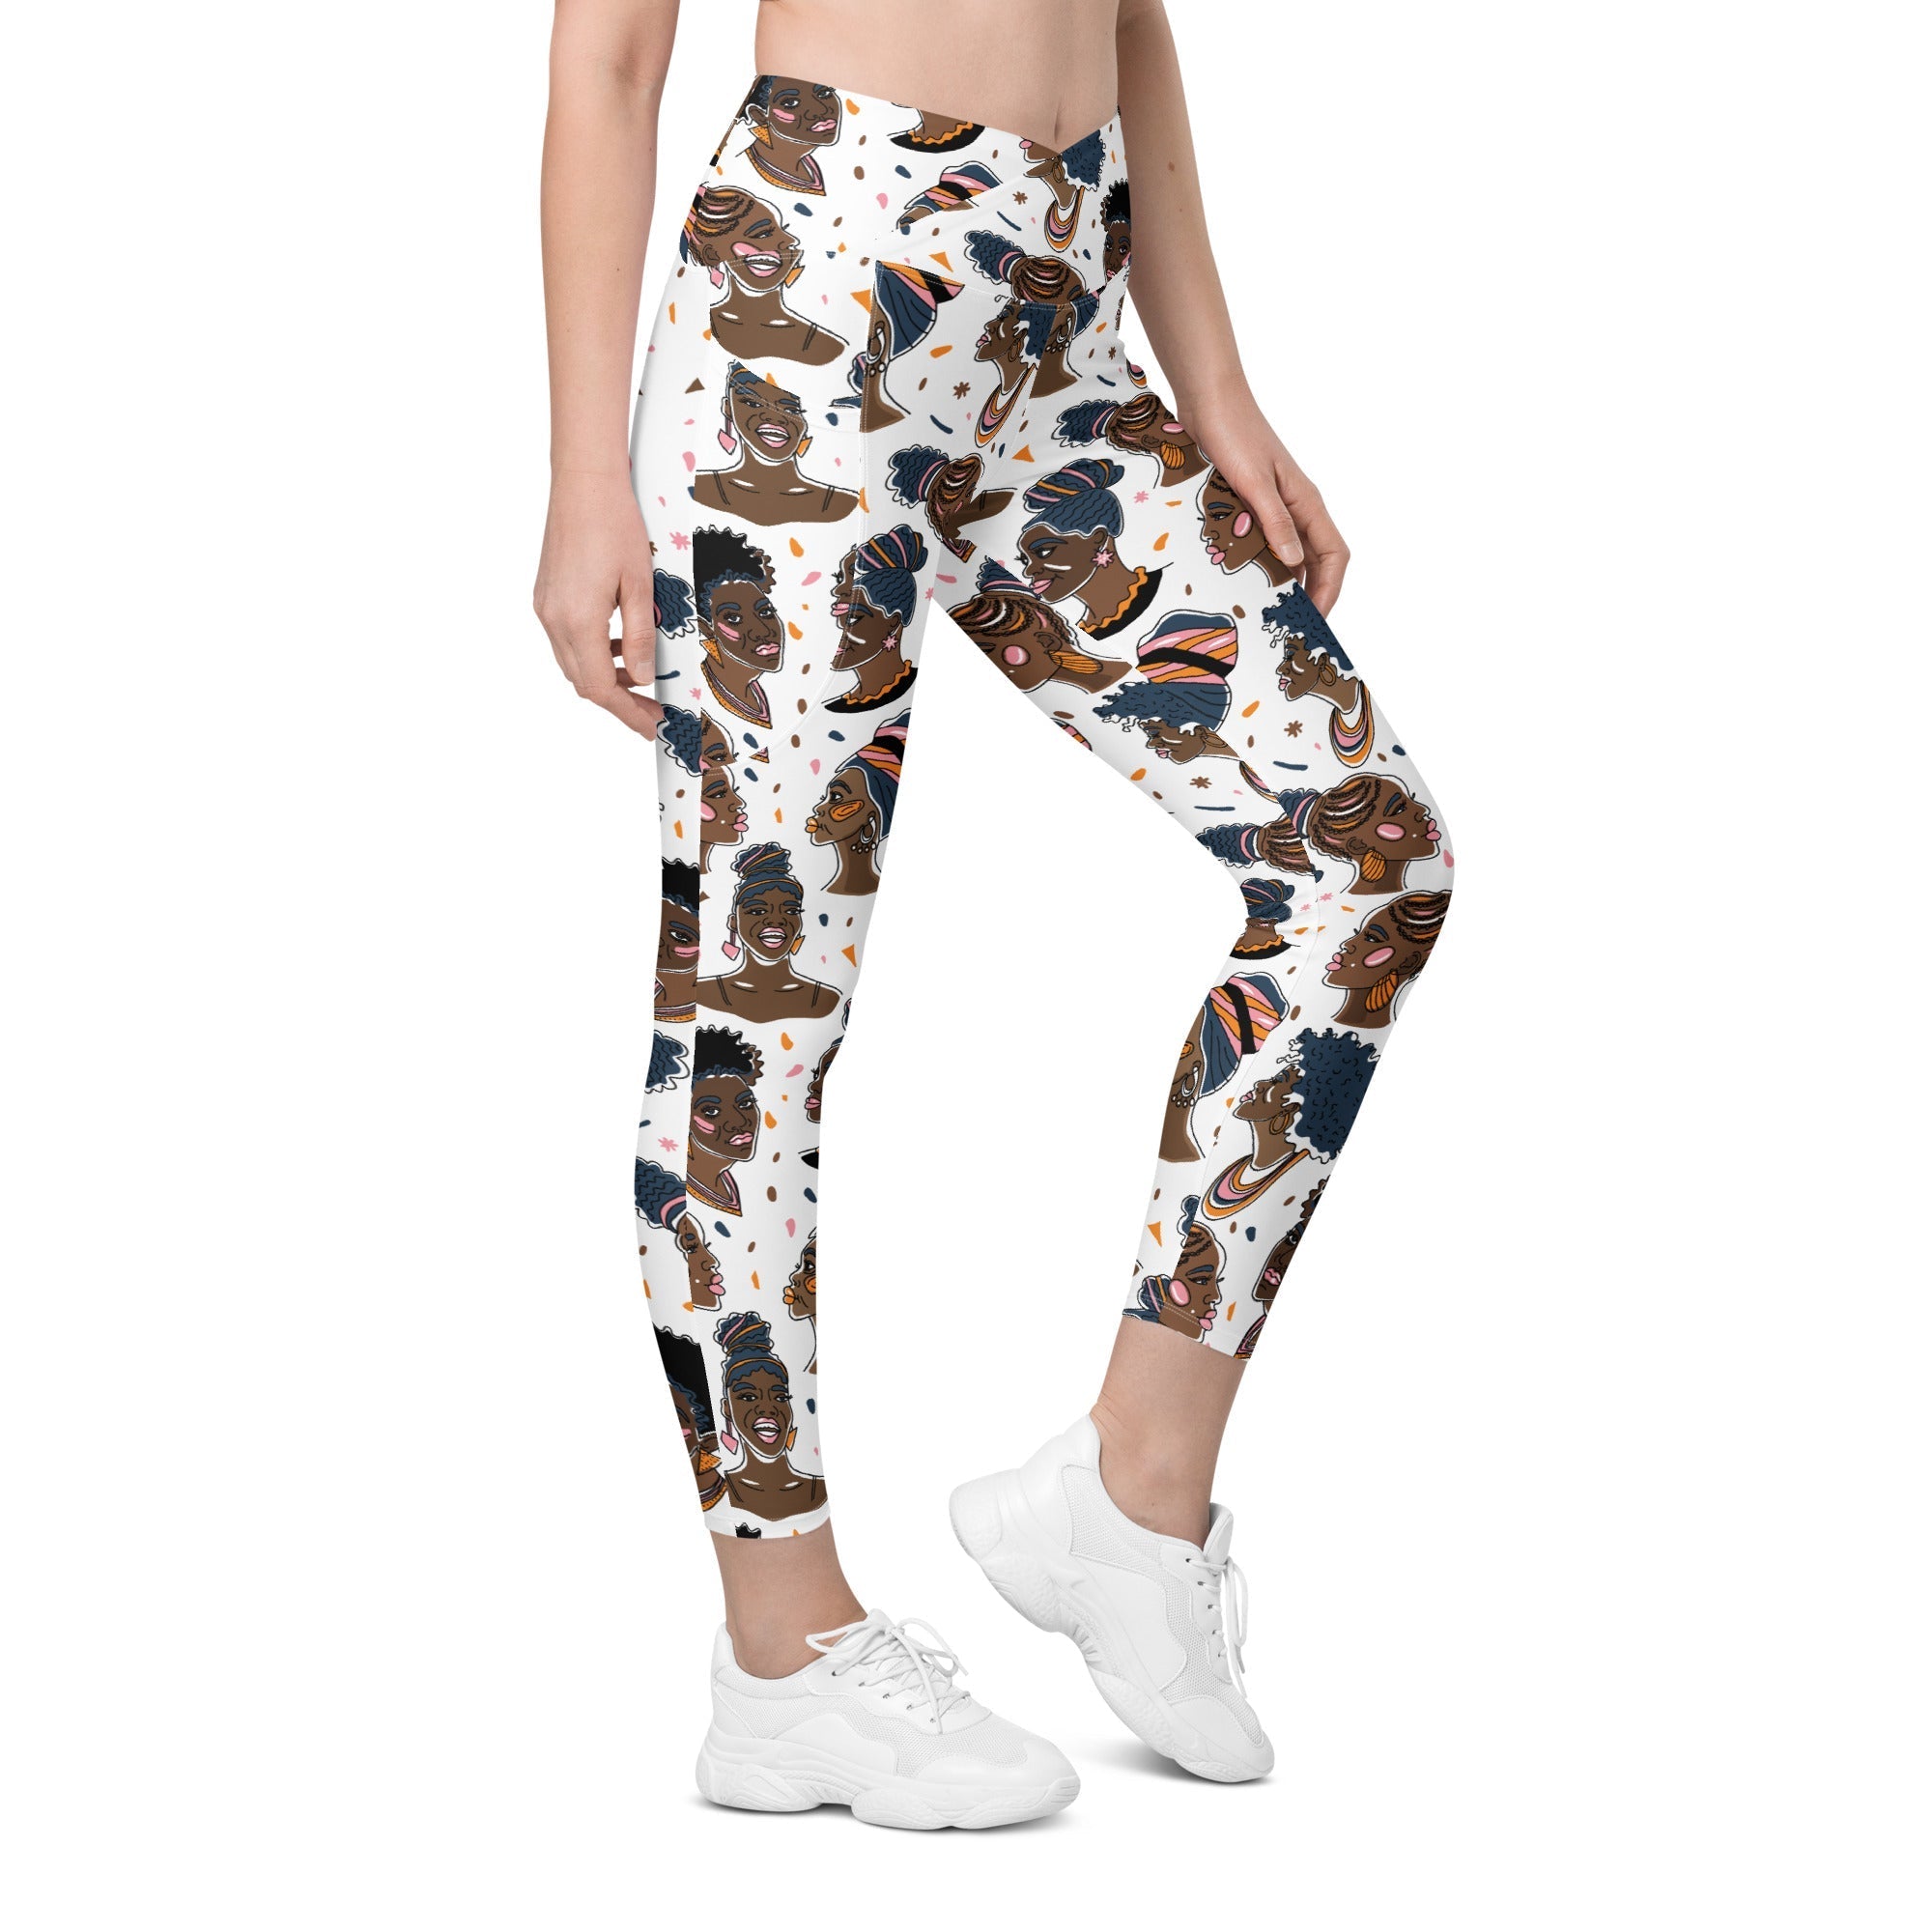 Beautiful Girls Crossover Leggings With Pockets